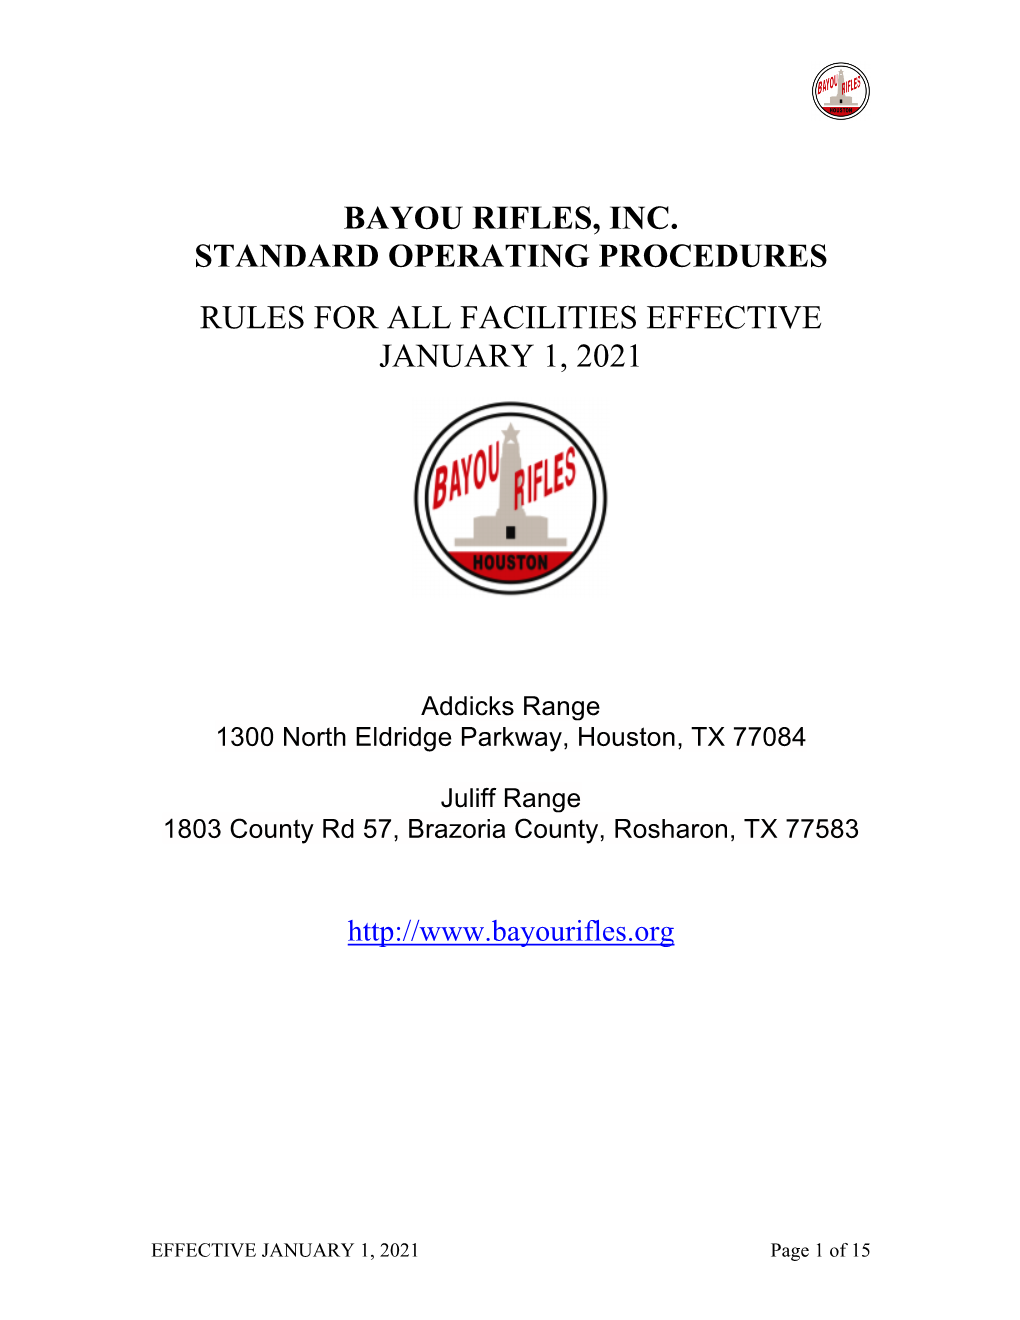 Bayou Rifles, Inc. Standard Operating Procedures Rules for All Facilities